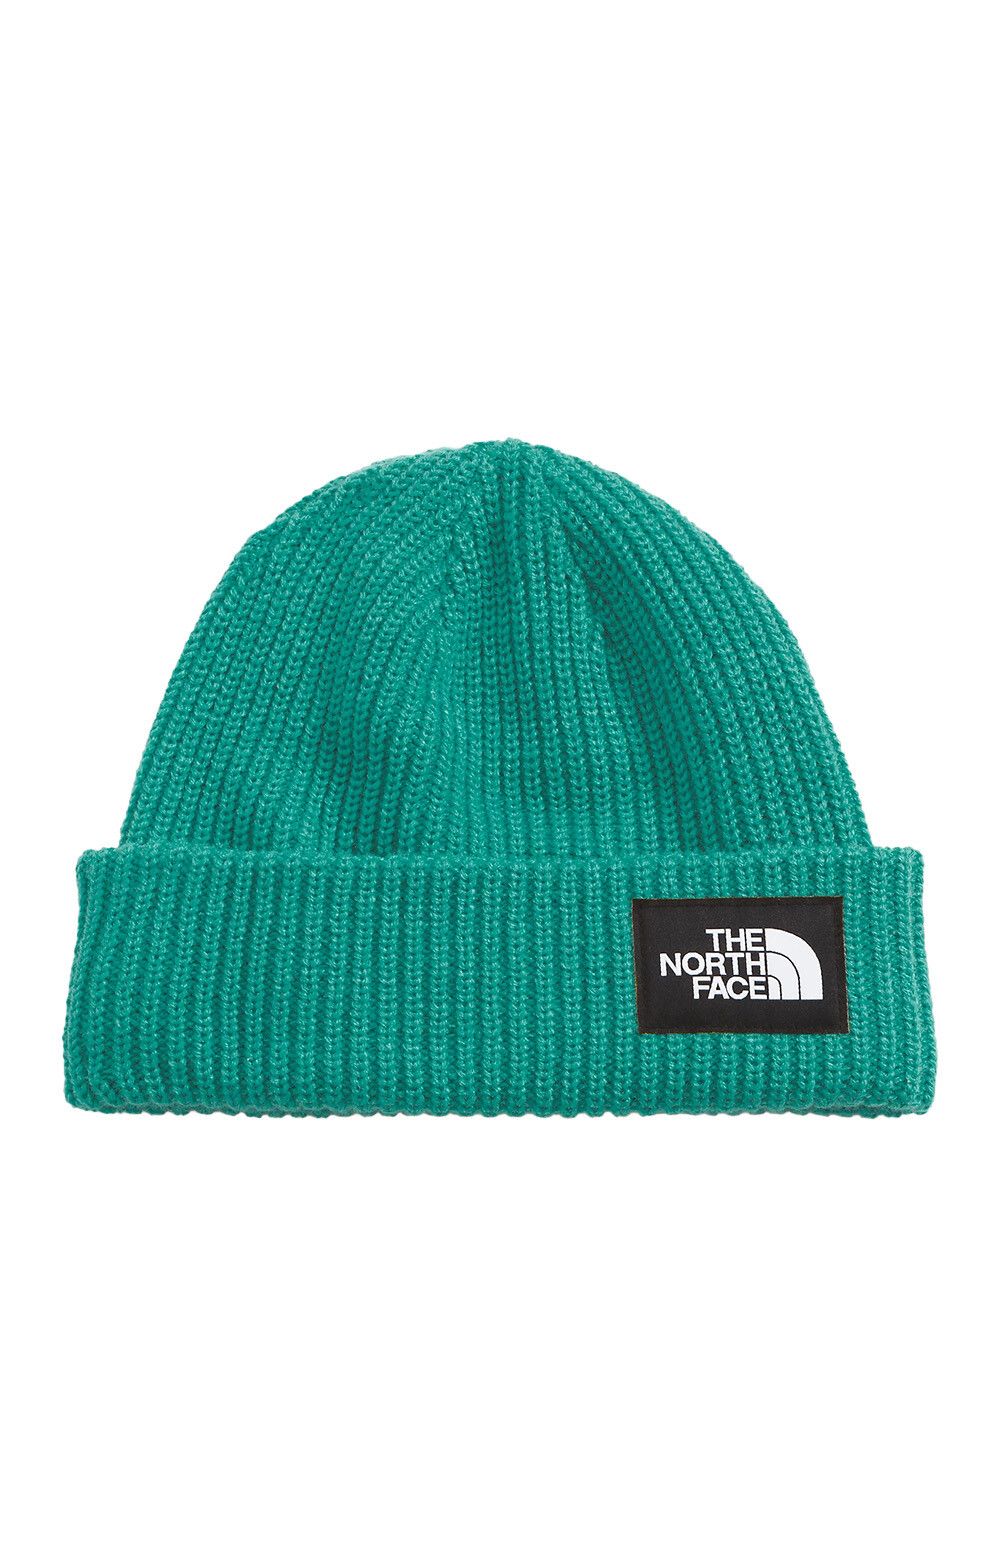 The North Face Salty Beanie | Grailed